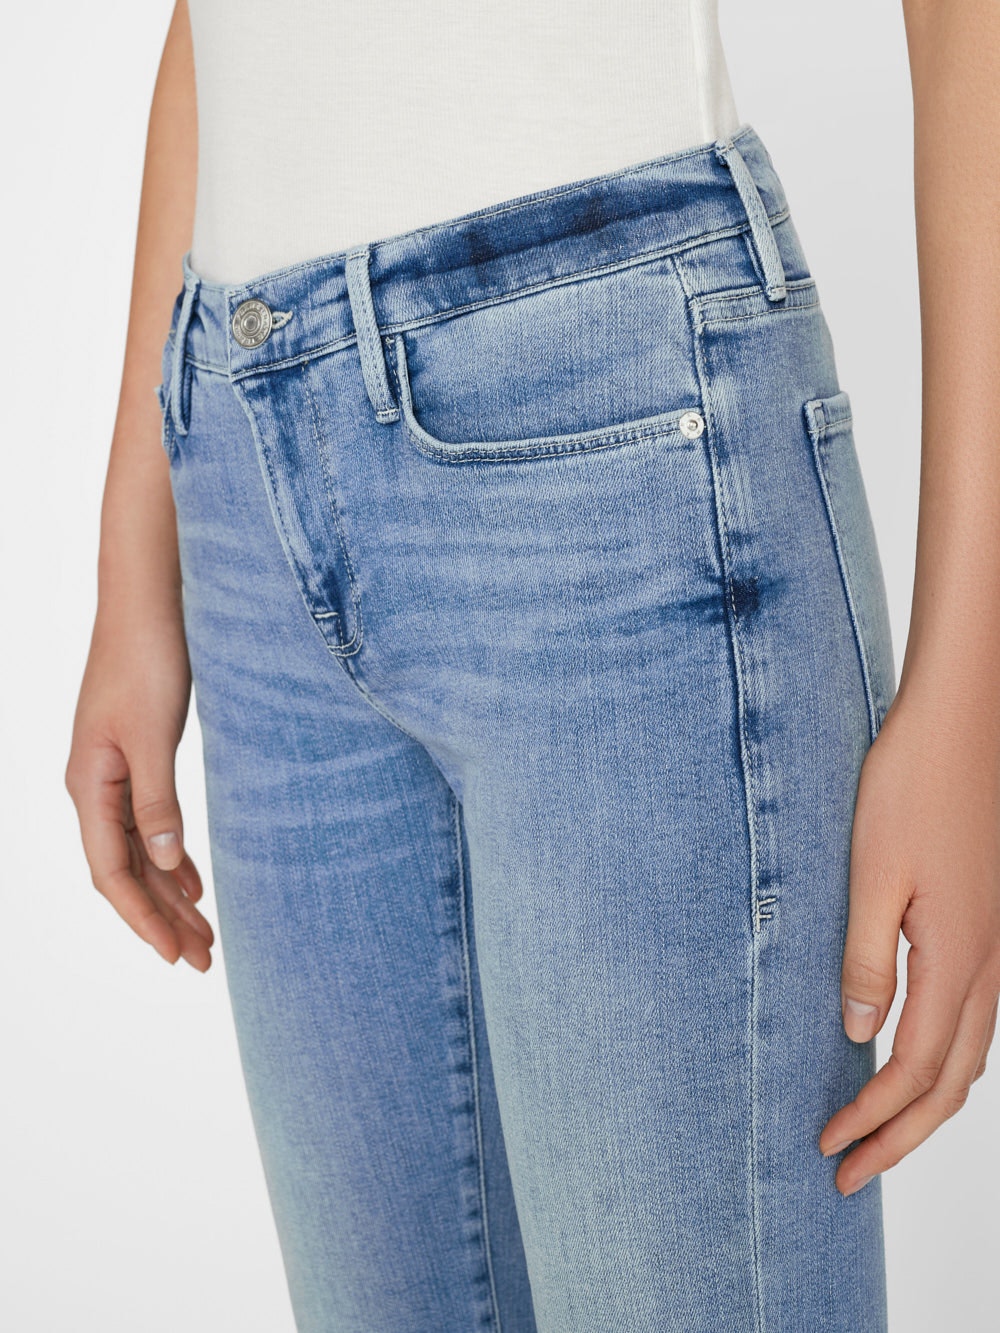 The sustainable back view of a woman wearing Frame's Le Garcon - Galeston boyfriend jeans.